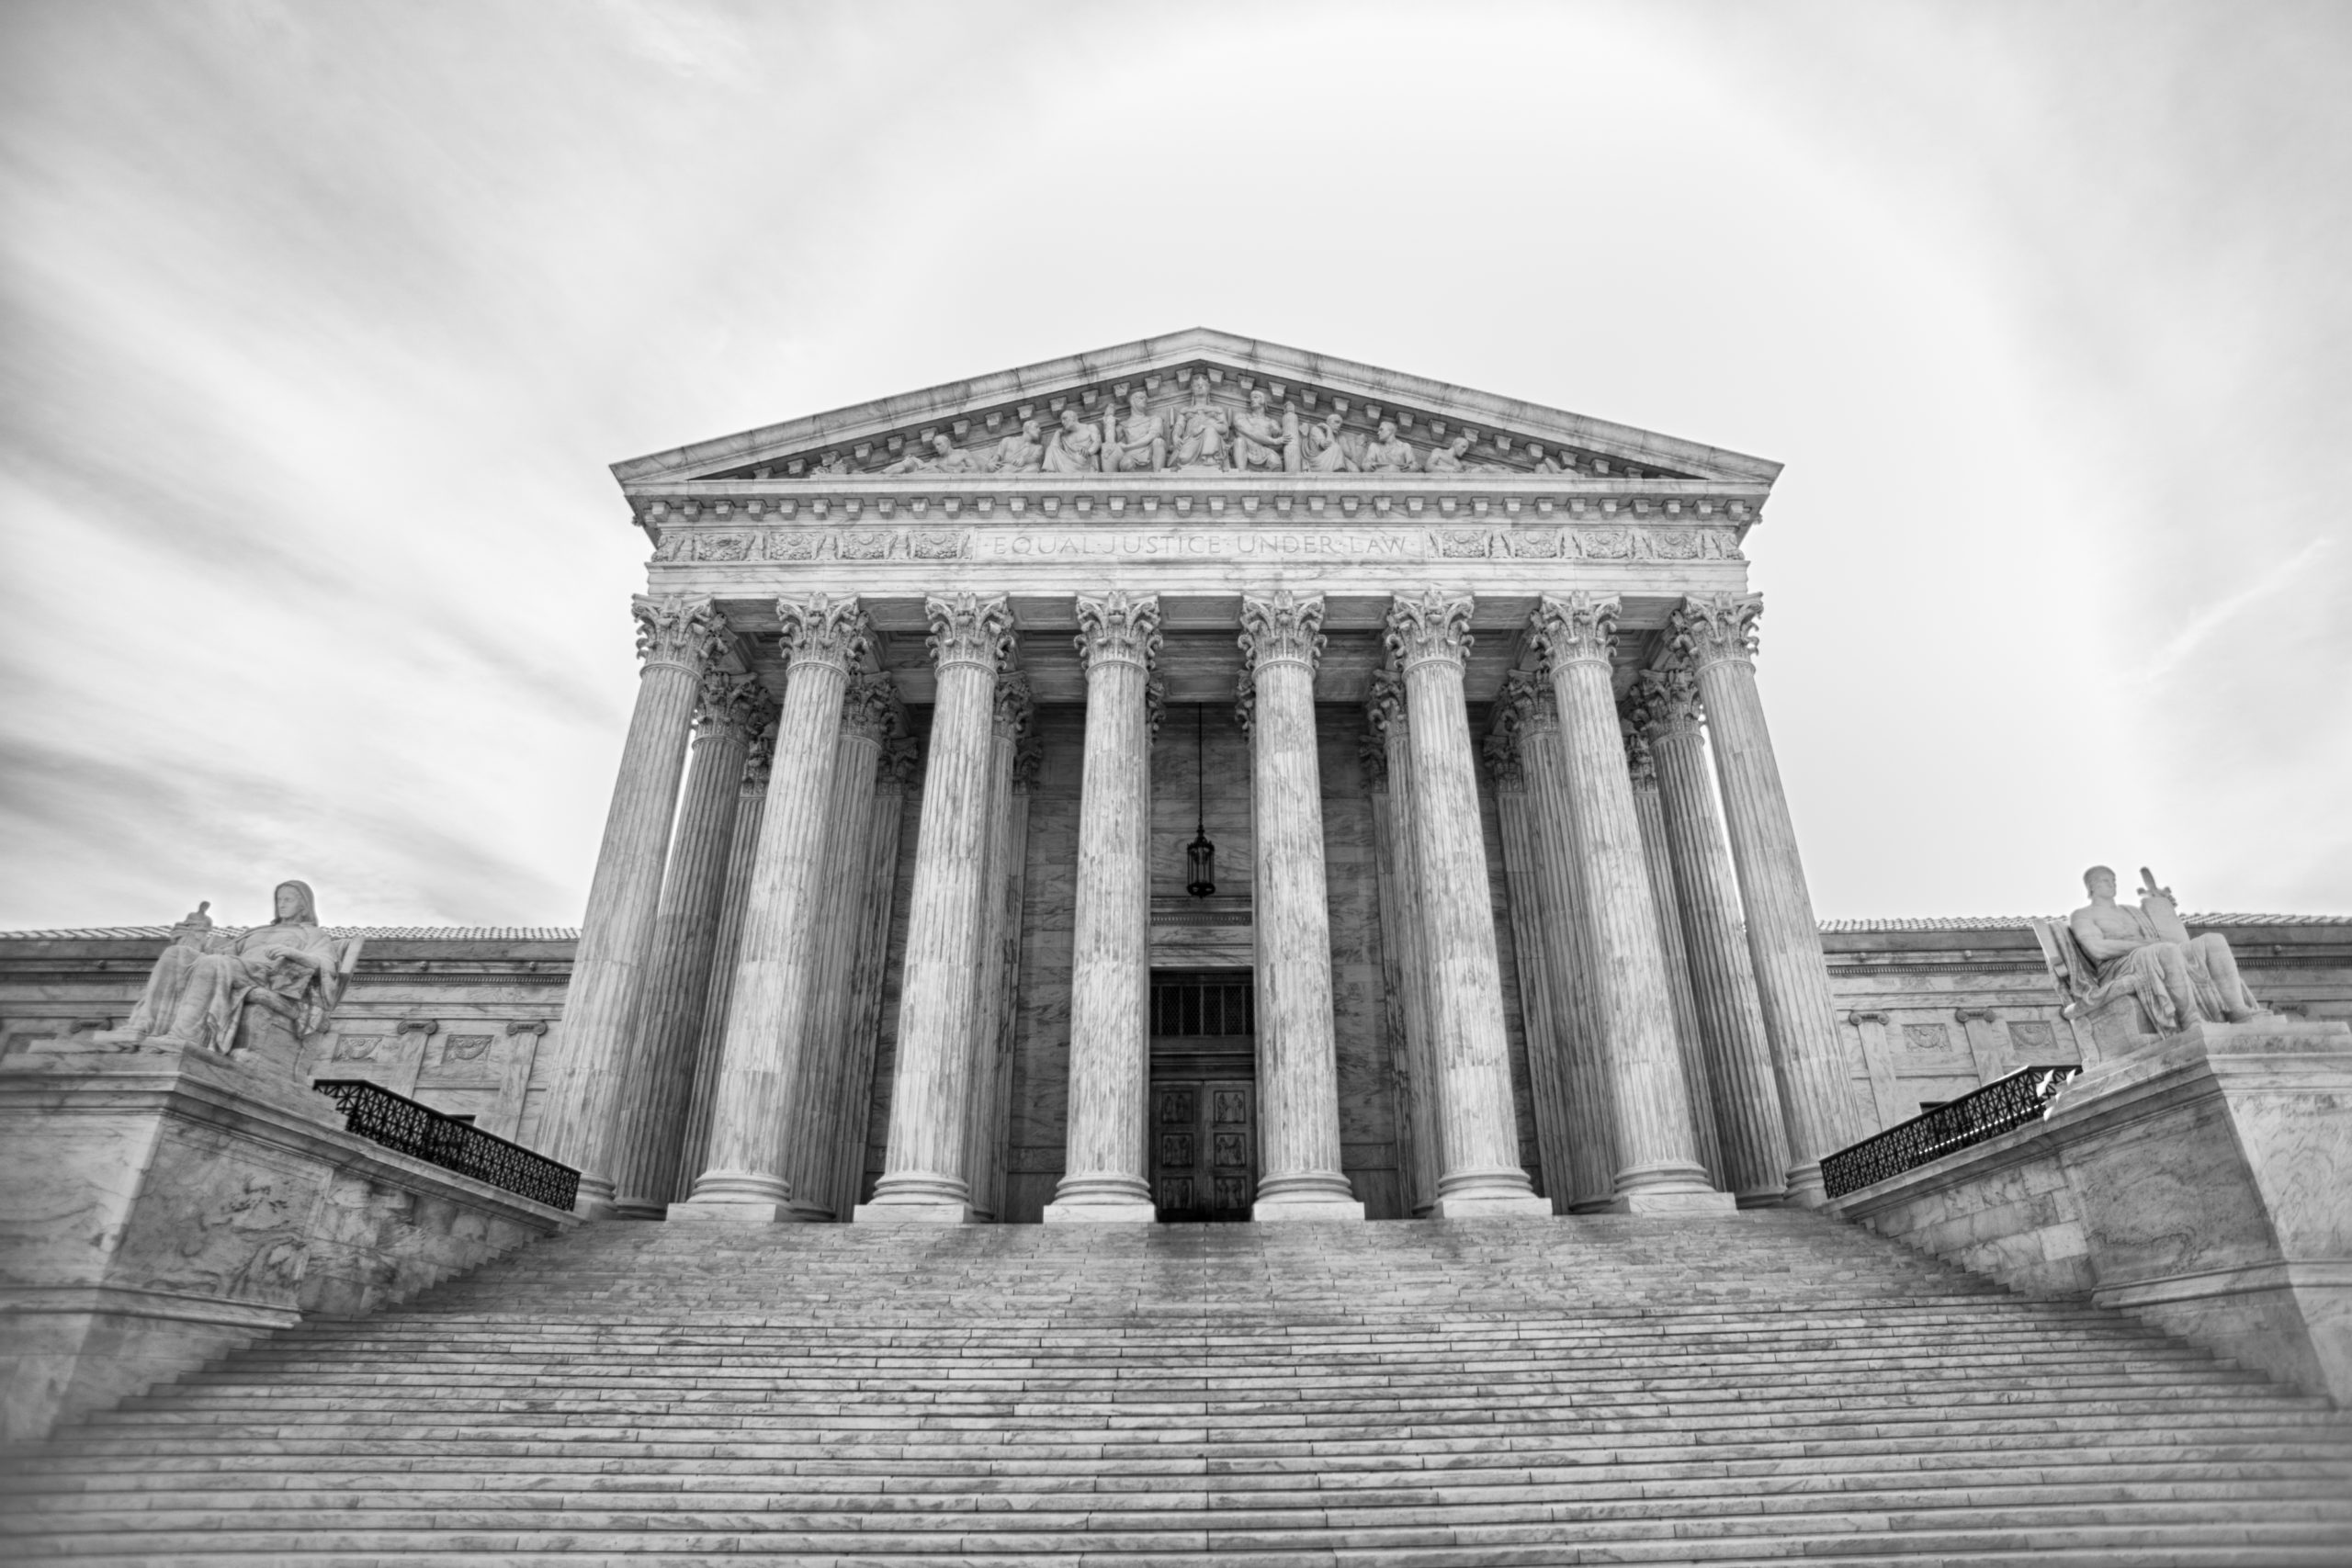 Family Organizations Ask Supreme Court to Protect Religious Liberty